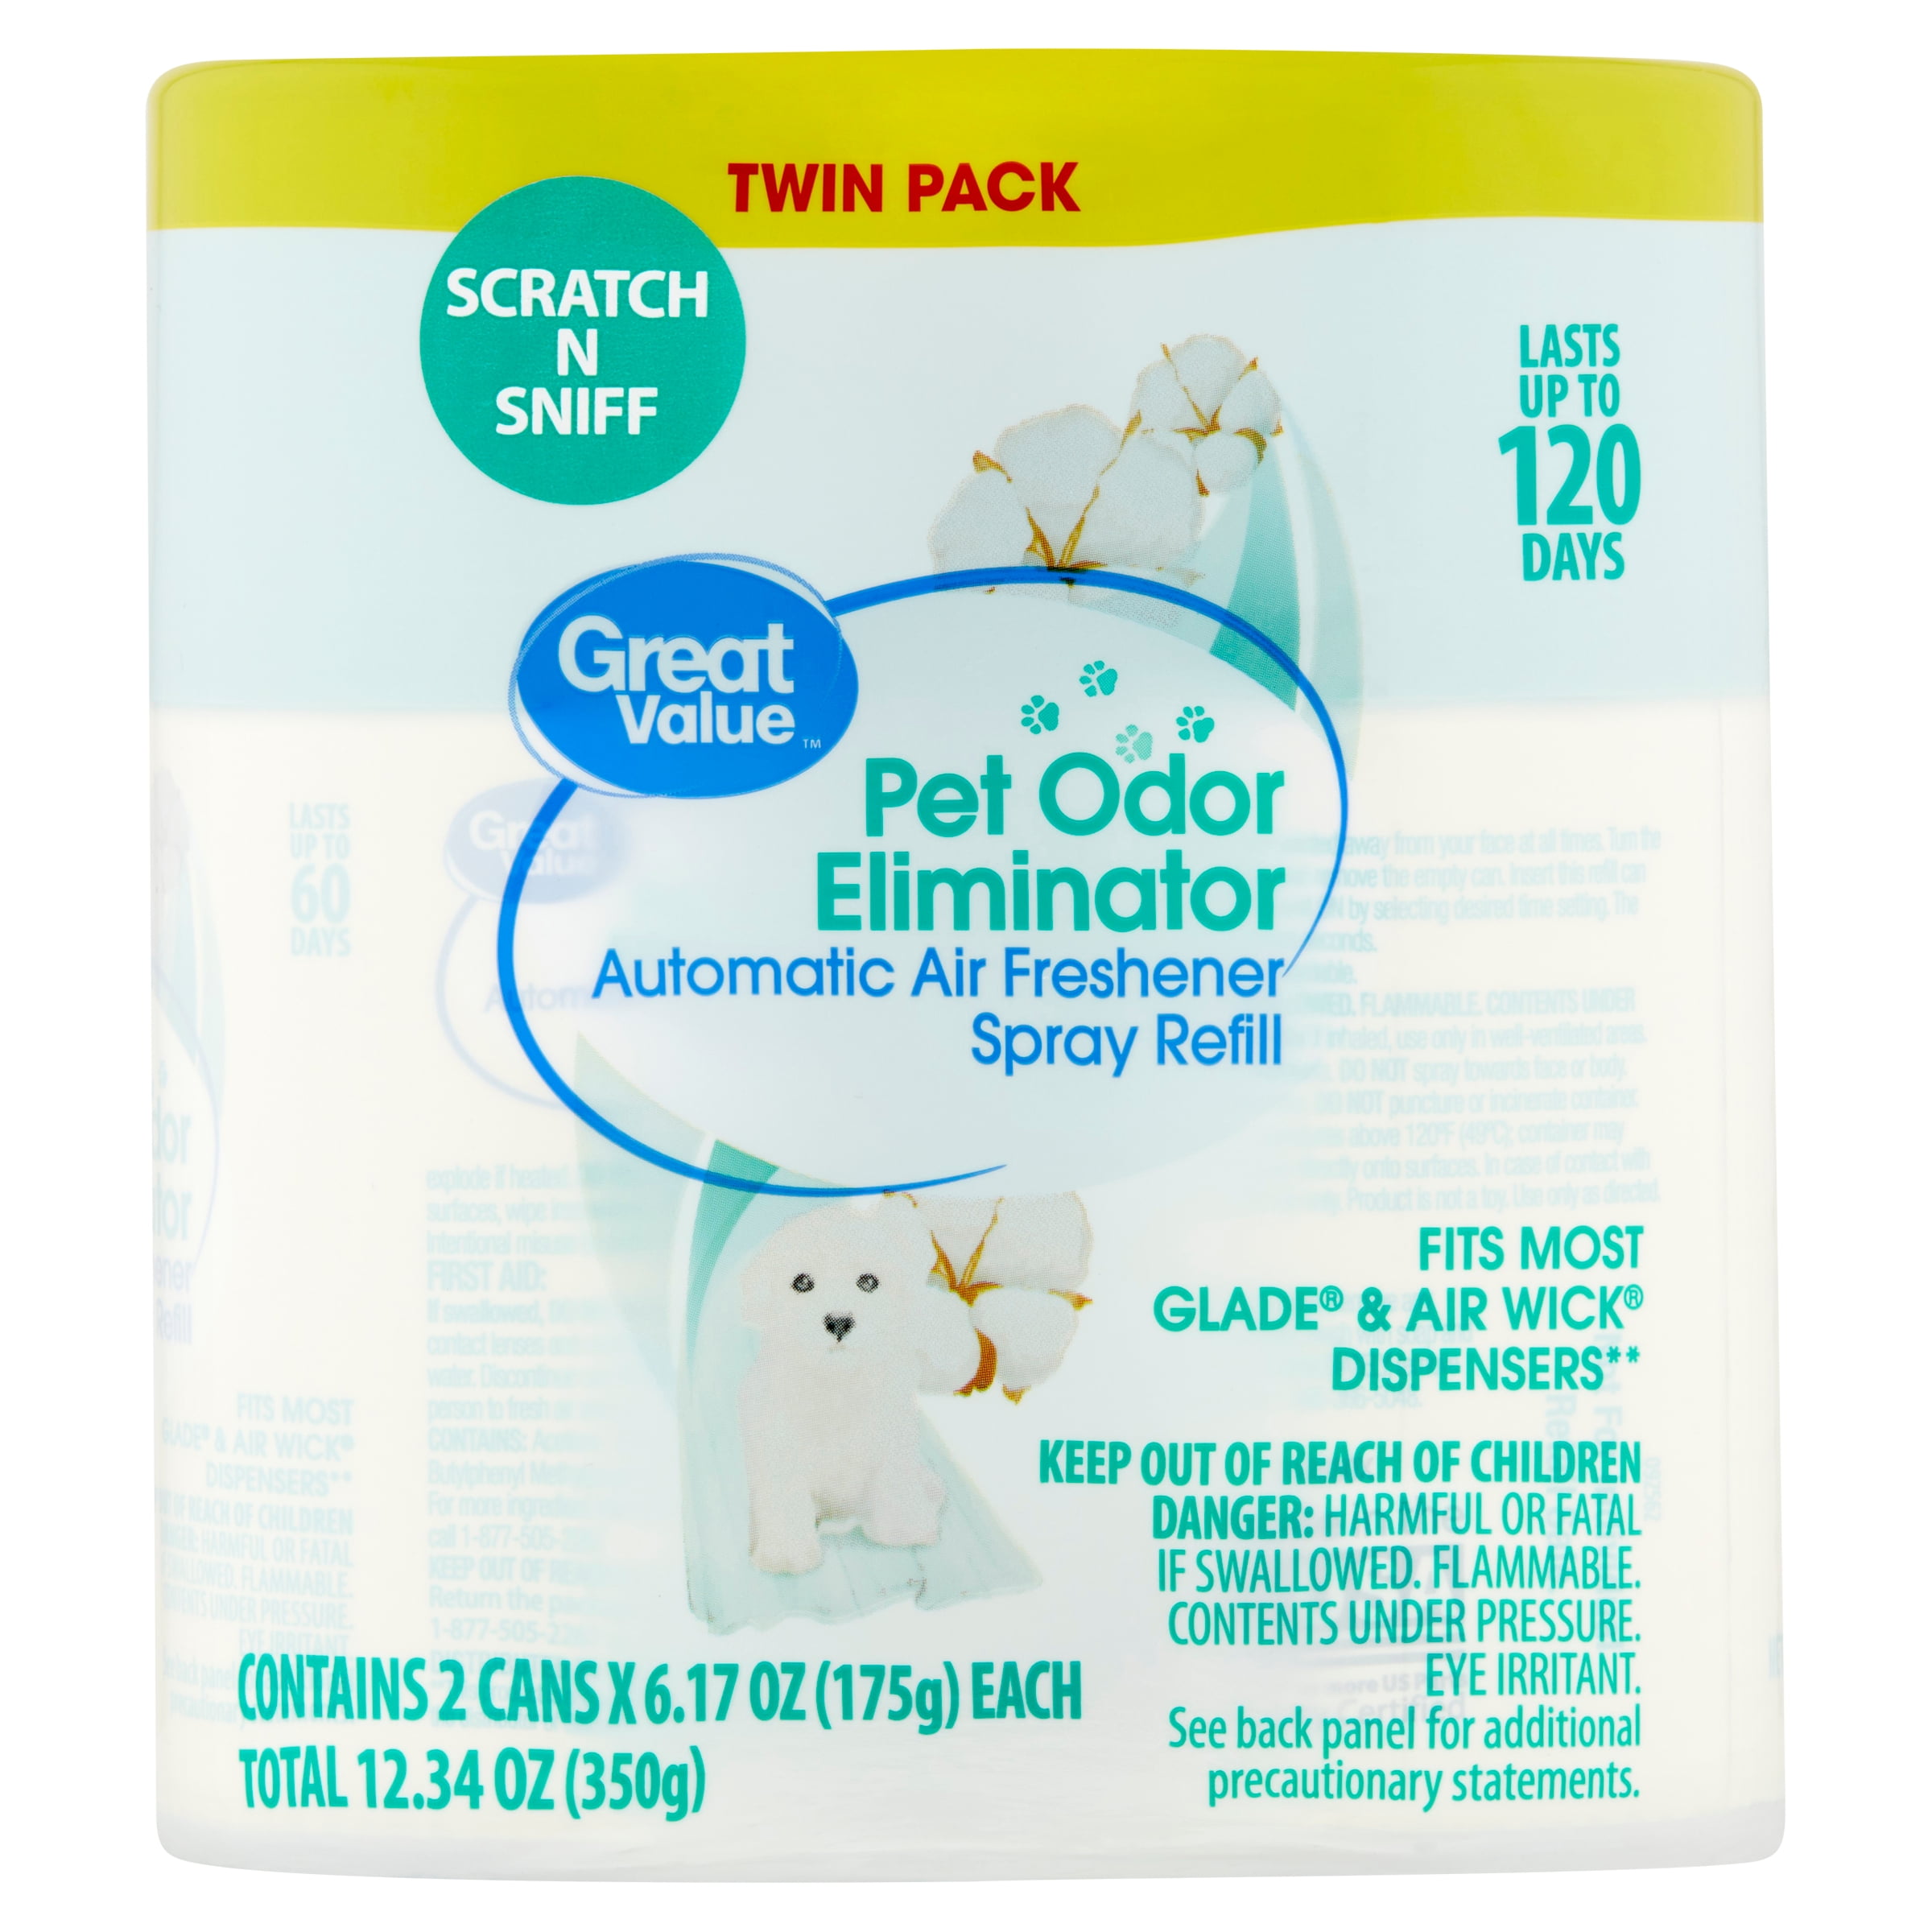 Great Value Pet Odor Eliminator Automatic Air Freshener Spray Refill, 12.34 oz, 2 Count